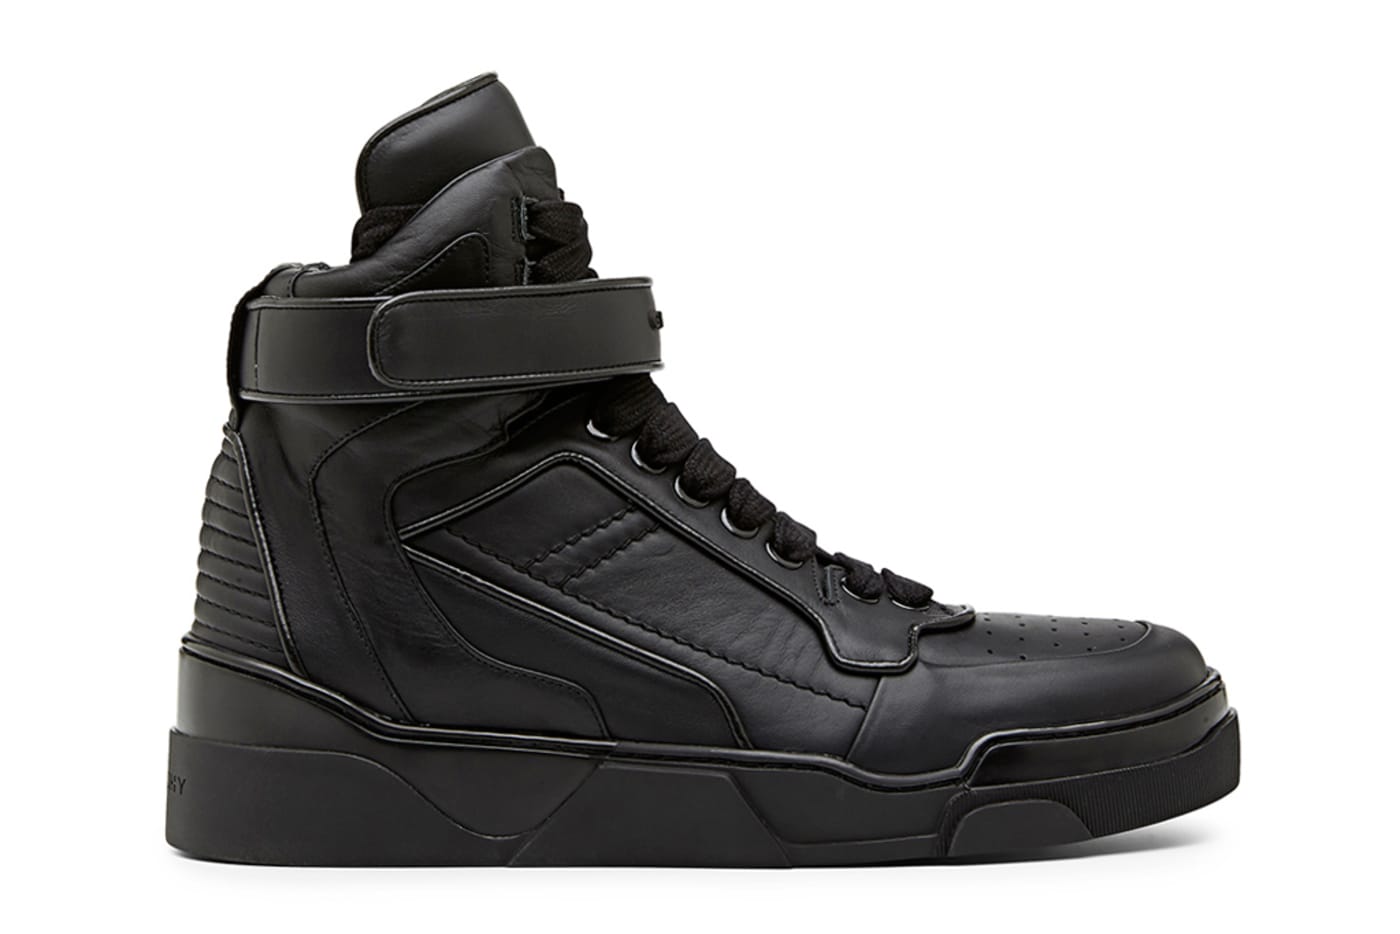 Givenchy's Spring/Summer 2014 Sneakers Are Great If You Don't Want To Wait  For Nike x Riccardo Tisci | Complex